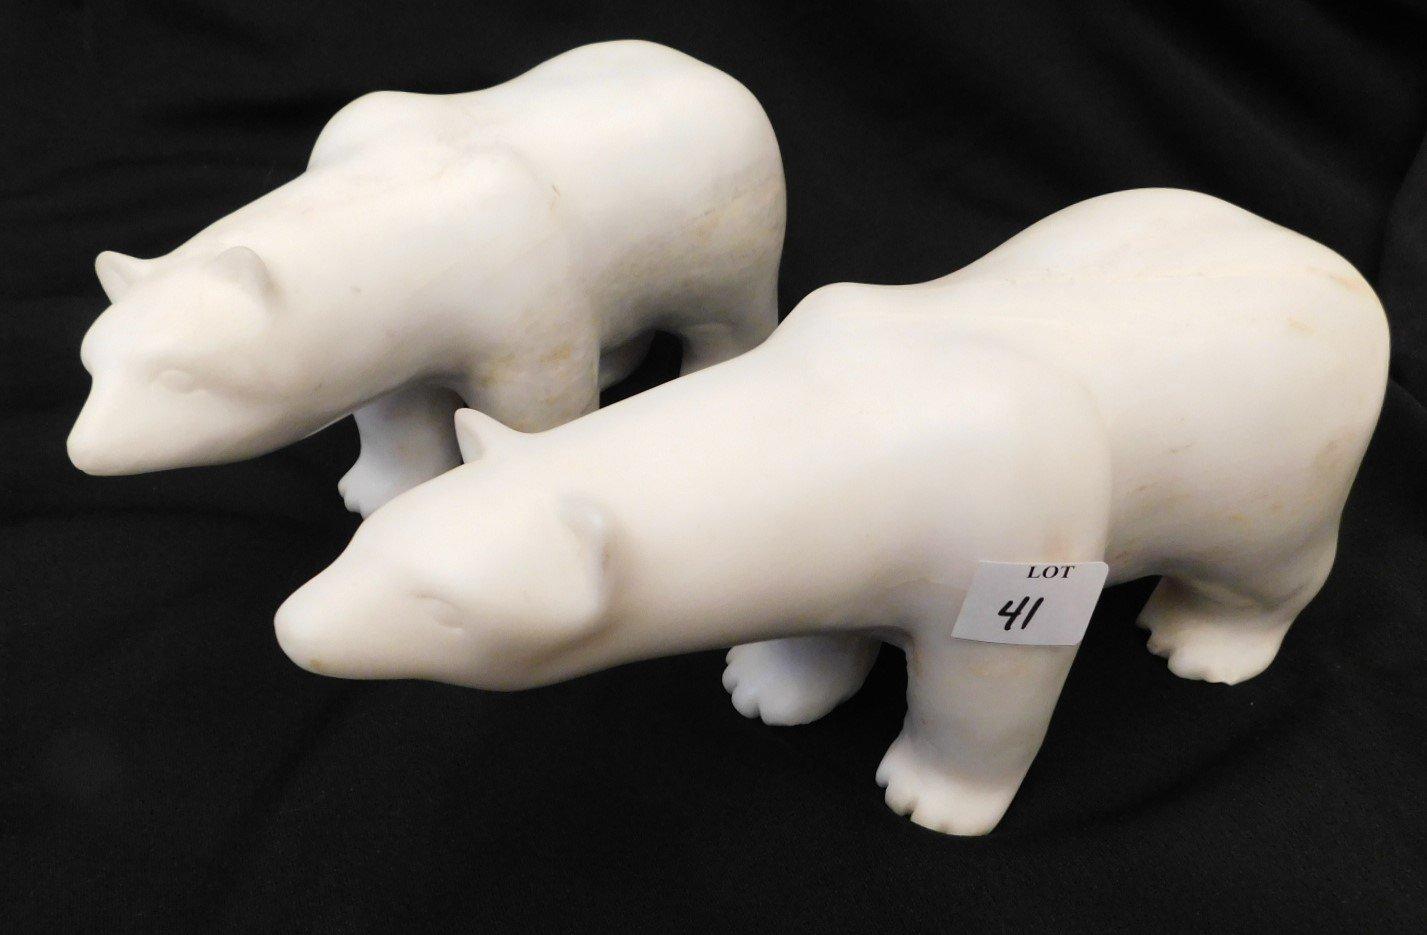 2 MARBLE POLAR BEARS CARVED BY THE  INUT 1921 MARKED ON BASE, WEIGHT 18 LBS